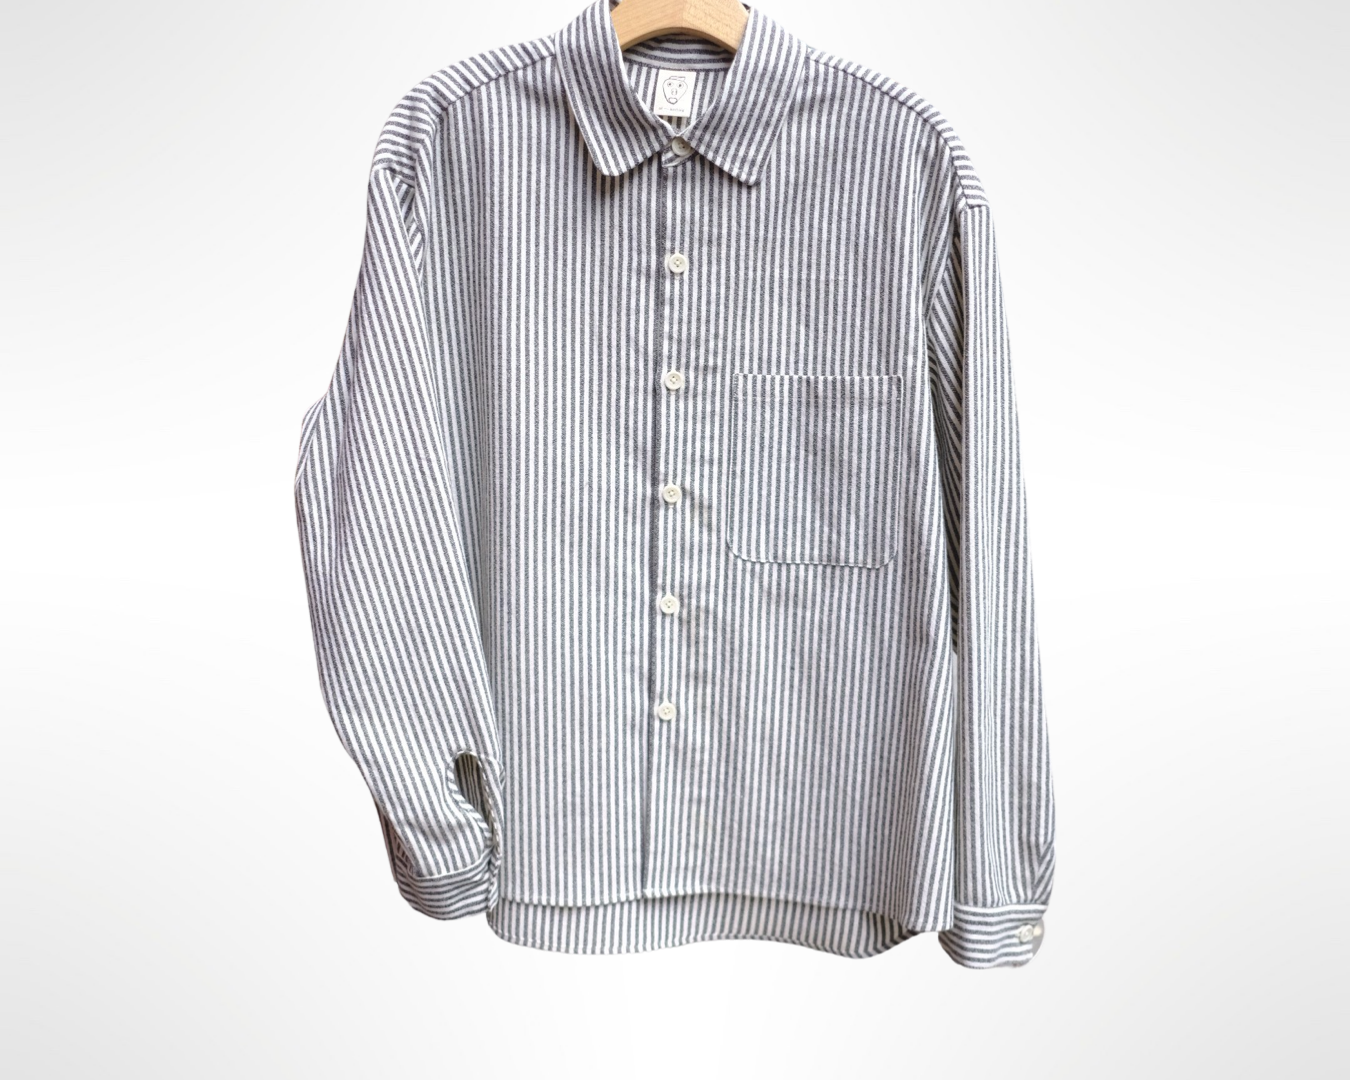 tent shirt in cotton/linen/ramie striped dobby